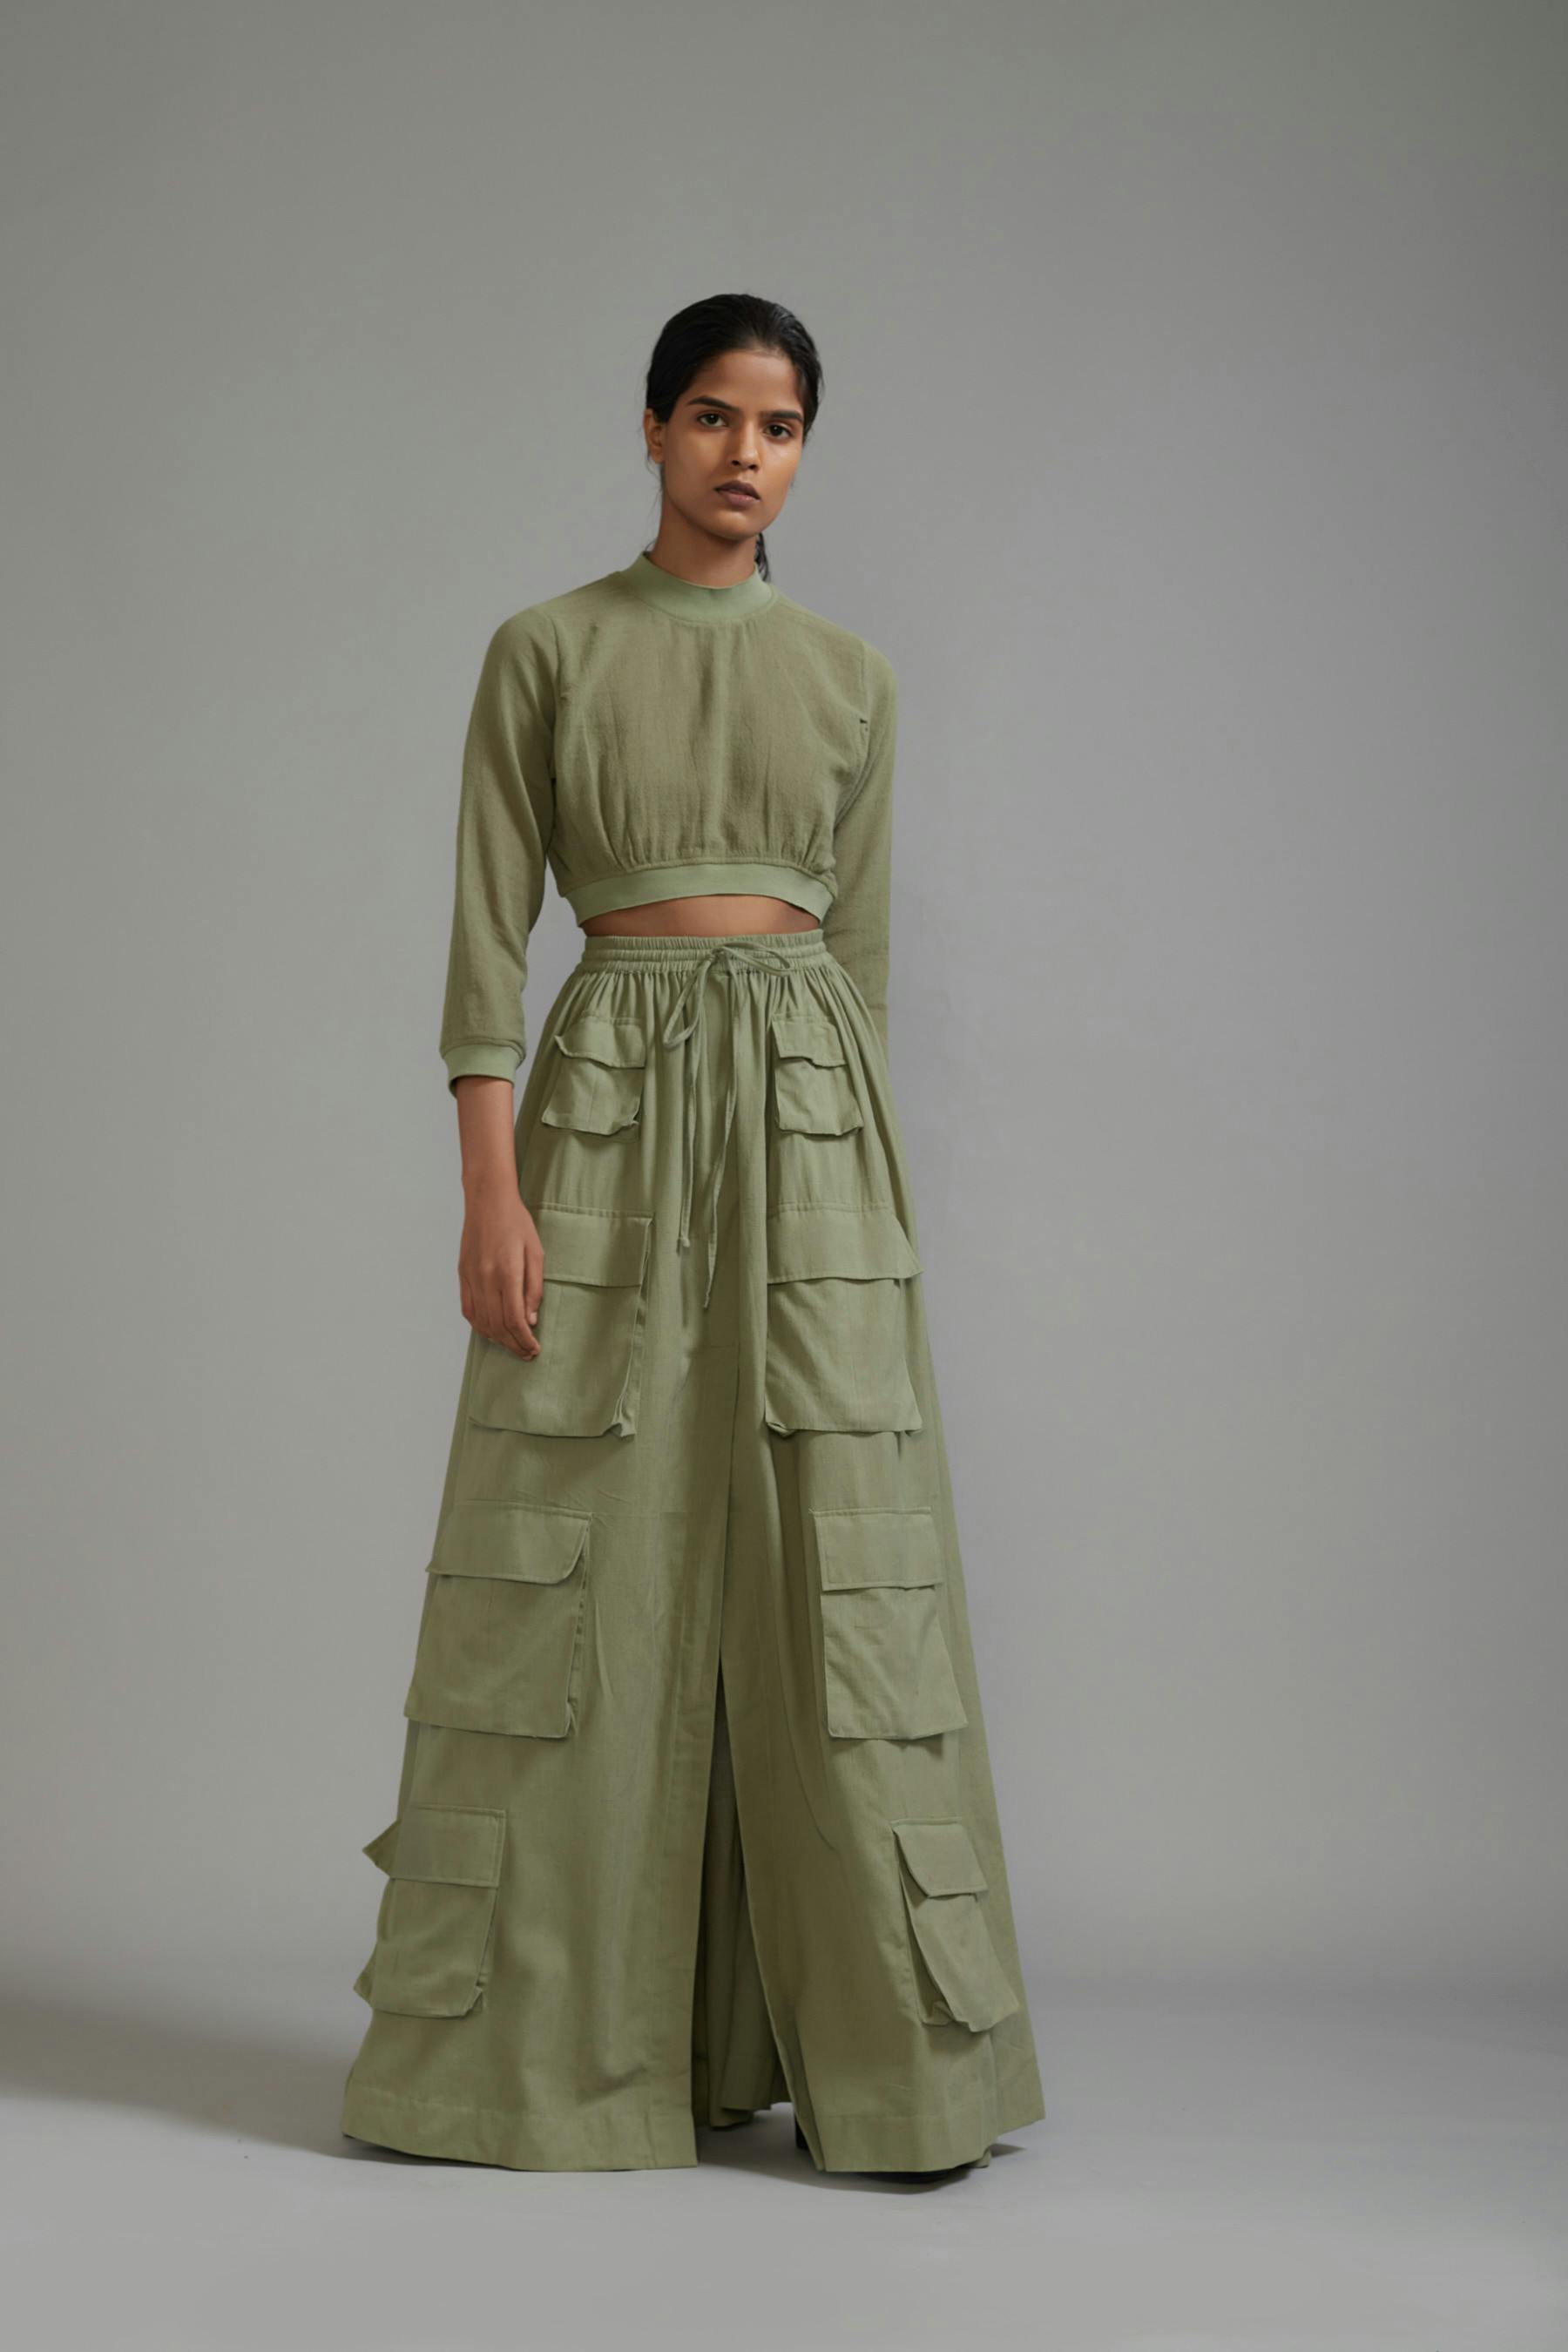 Green Cargo Skirt, a product by Style Mati